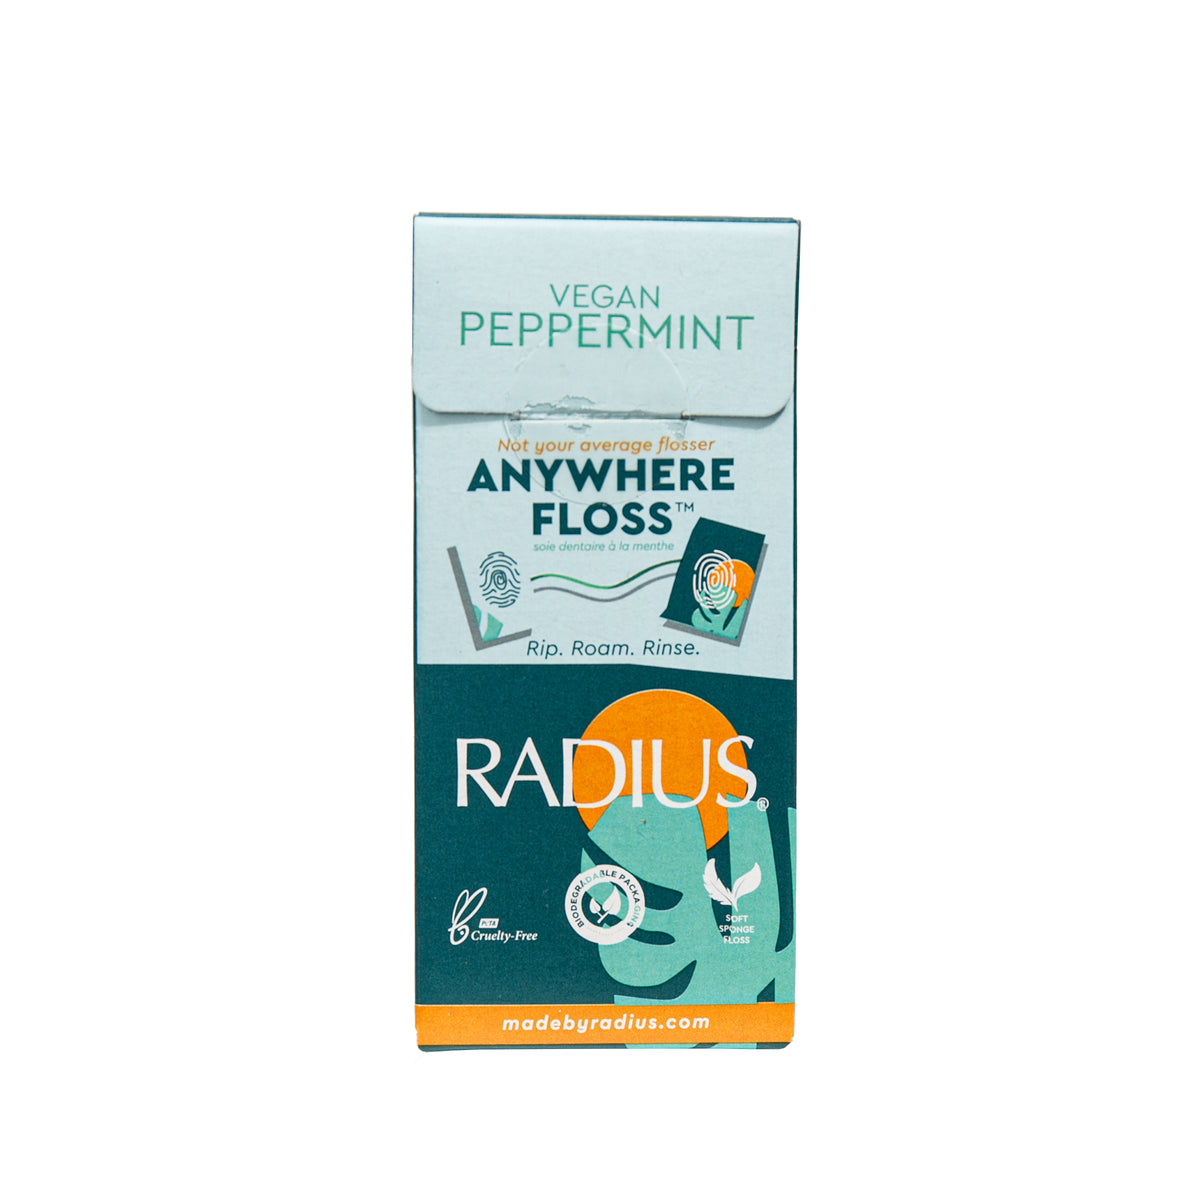 Primary image of Xylitol Mint Floss Sachet